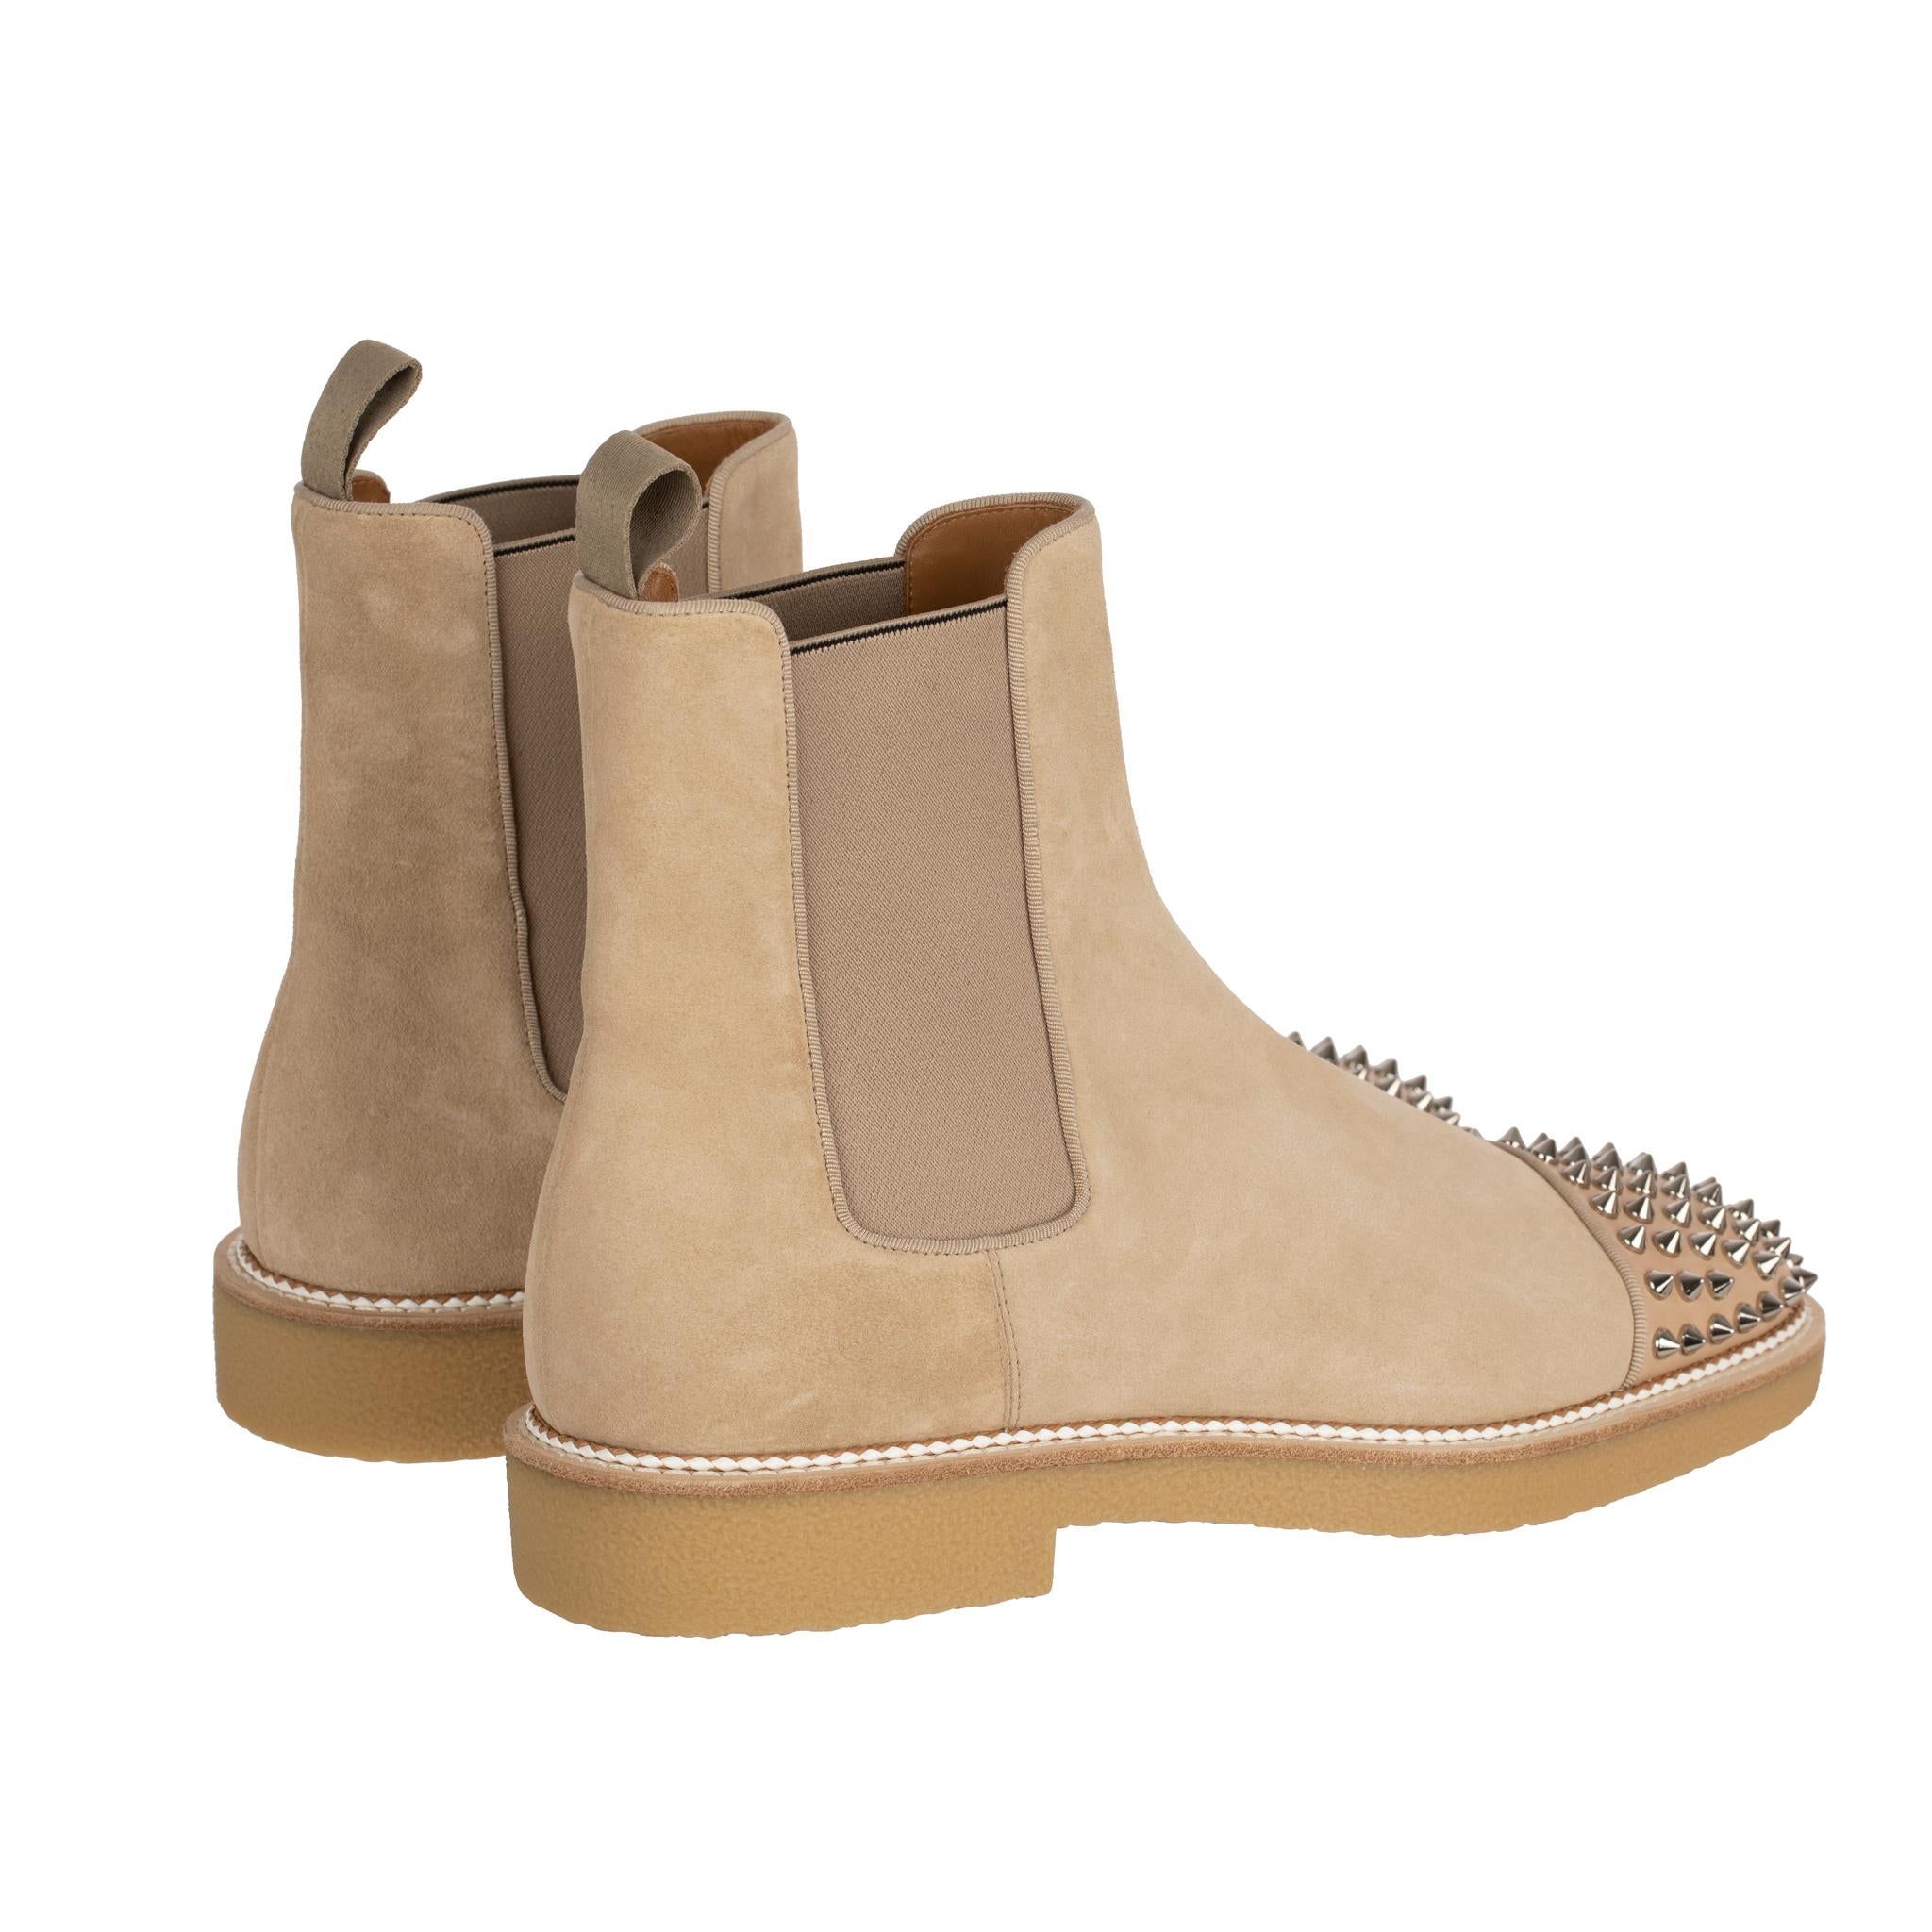 Christian Louboutin Mens Beige Suede Boots With Studs 41.5 FR For Sale 1